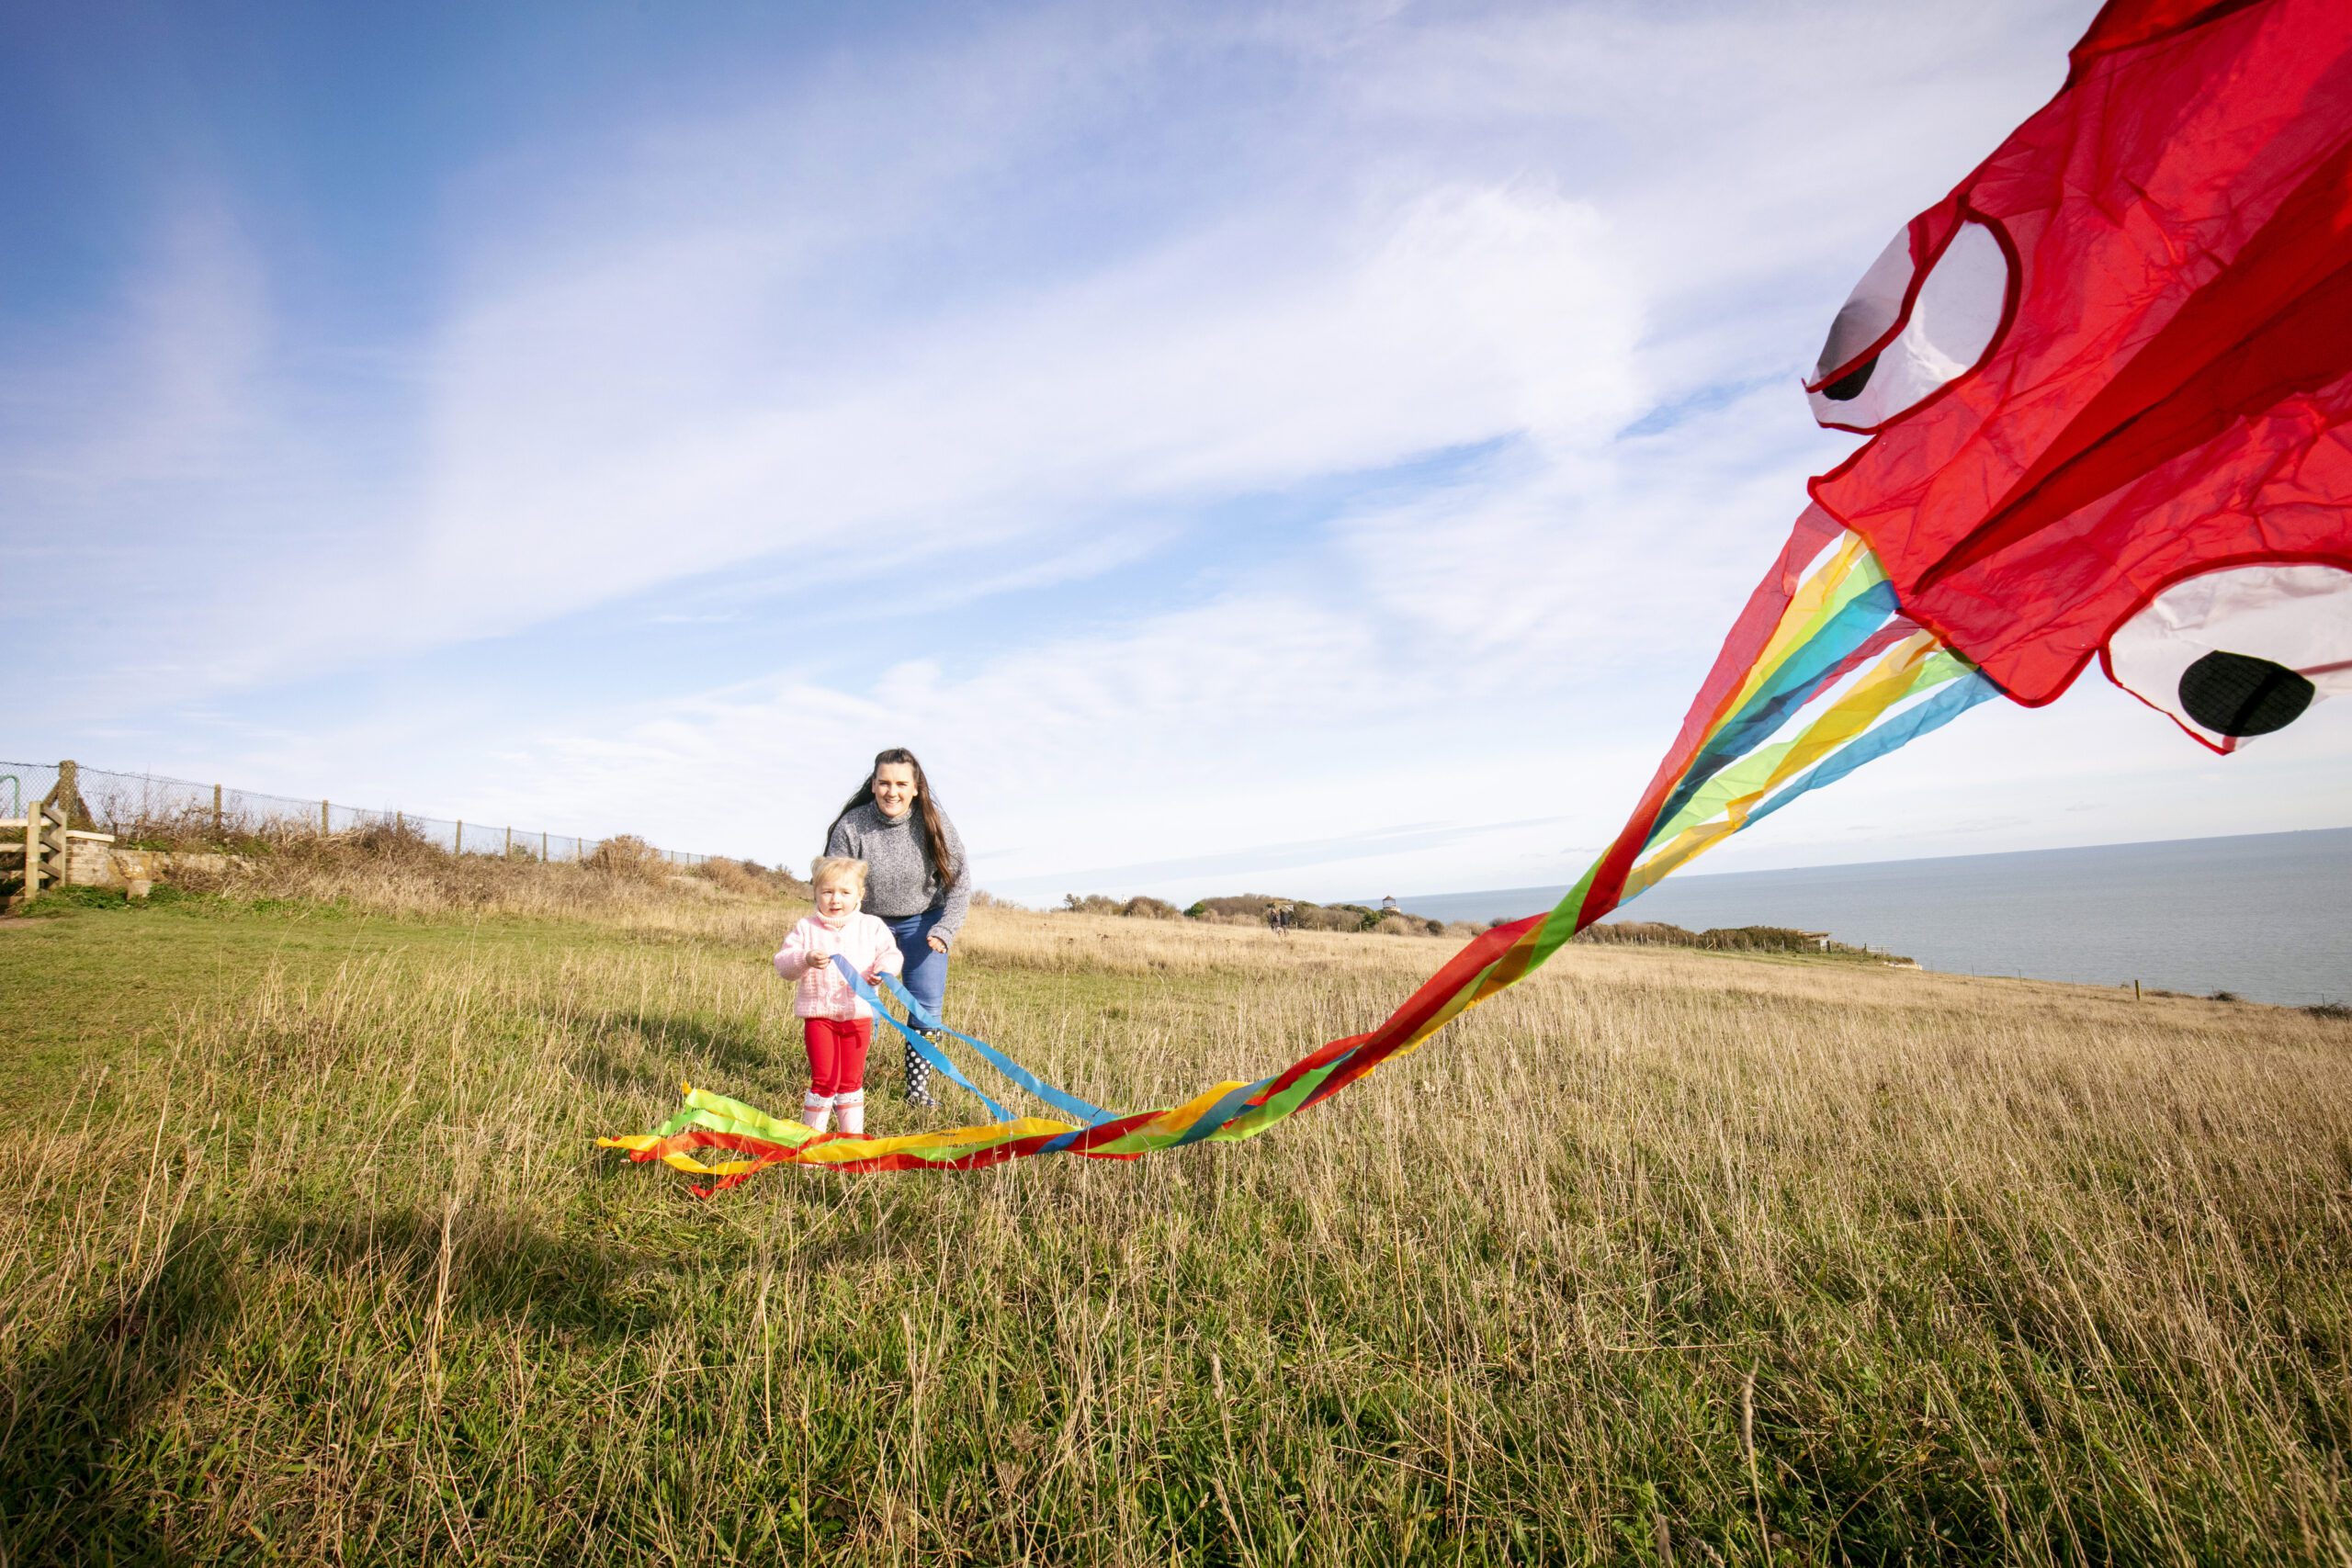 Person and child flying a red kite, in a grass field on a sunny day.